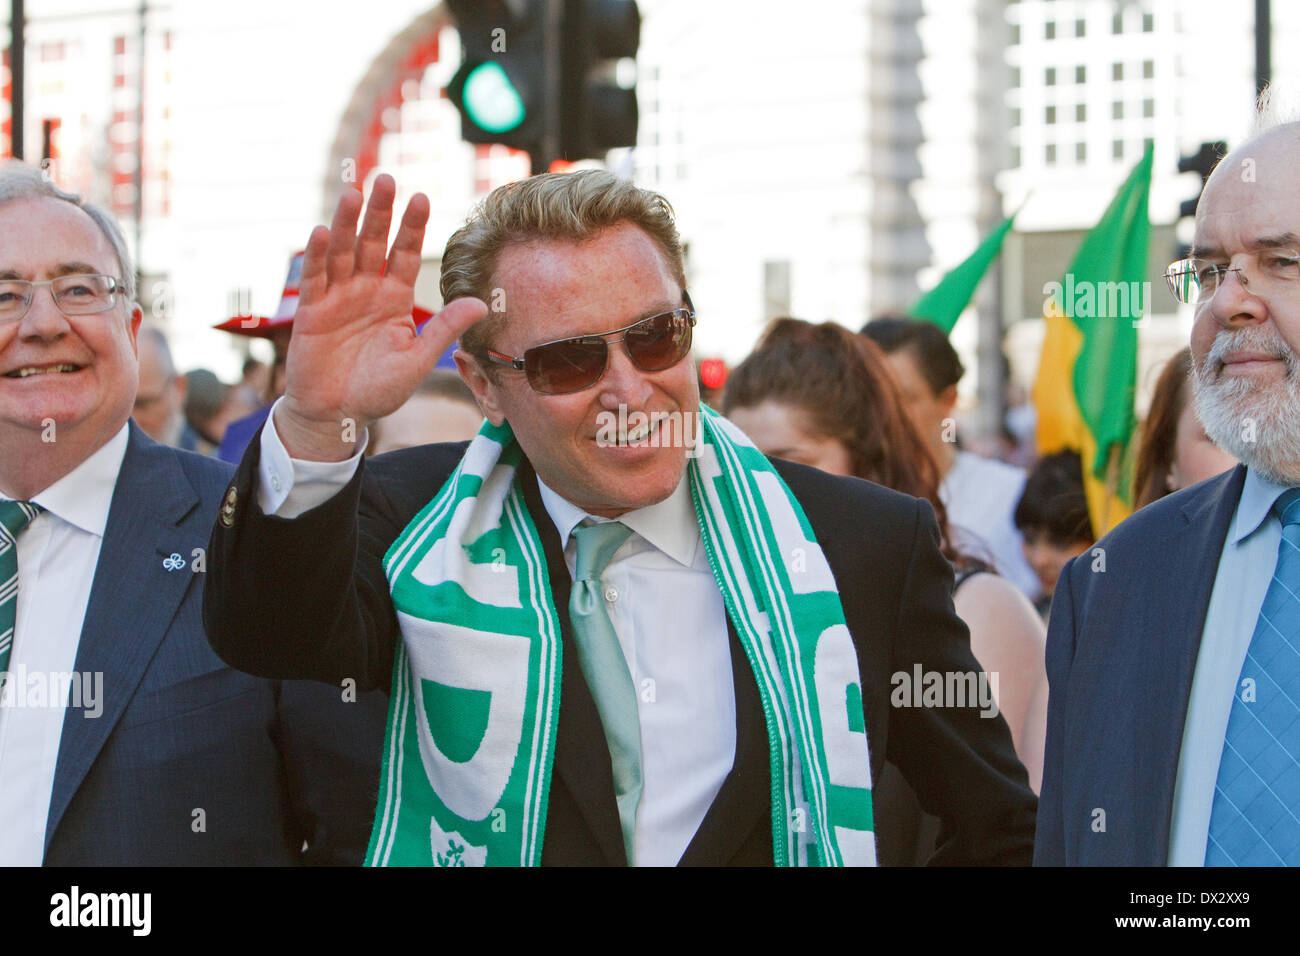 London,16th March 2014,Michael Flatley from Riverdance lead the St Patrick's Day parade in Londo Credit: Keith Larby/Alamy Live News Stock Photo